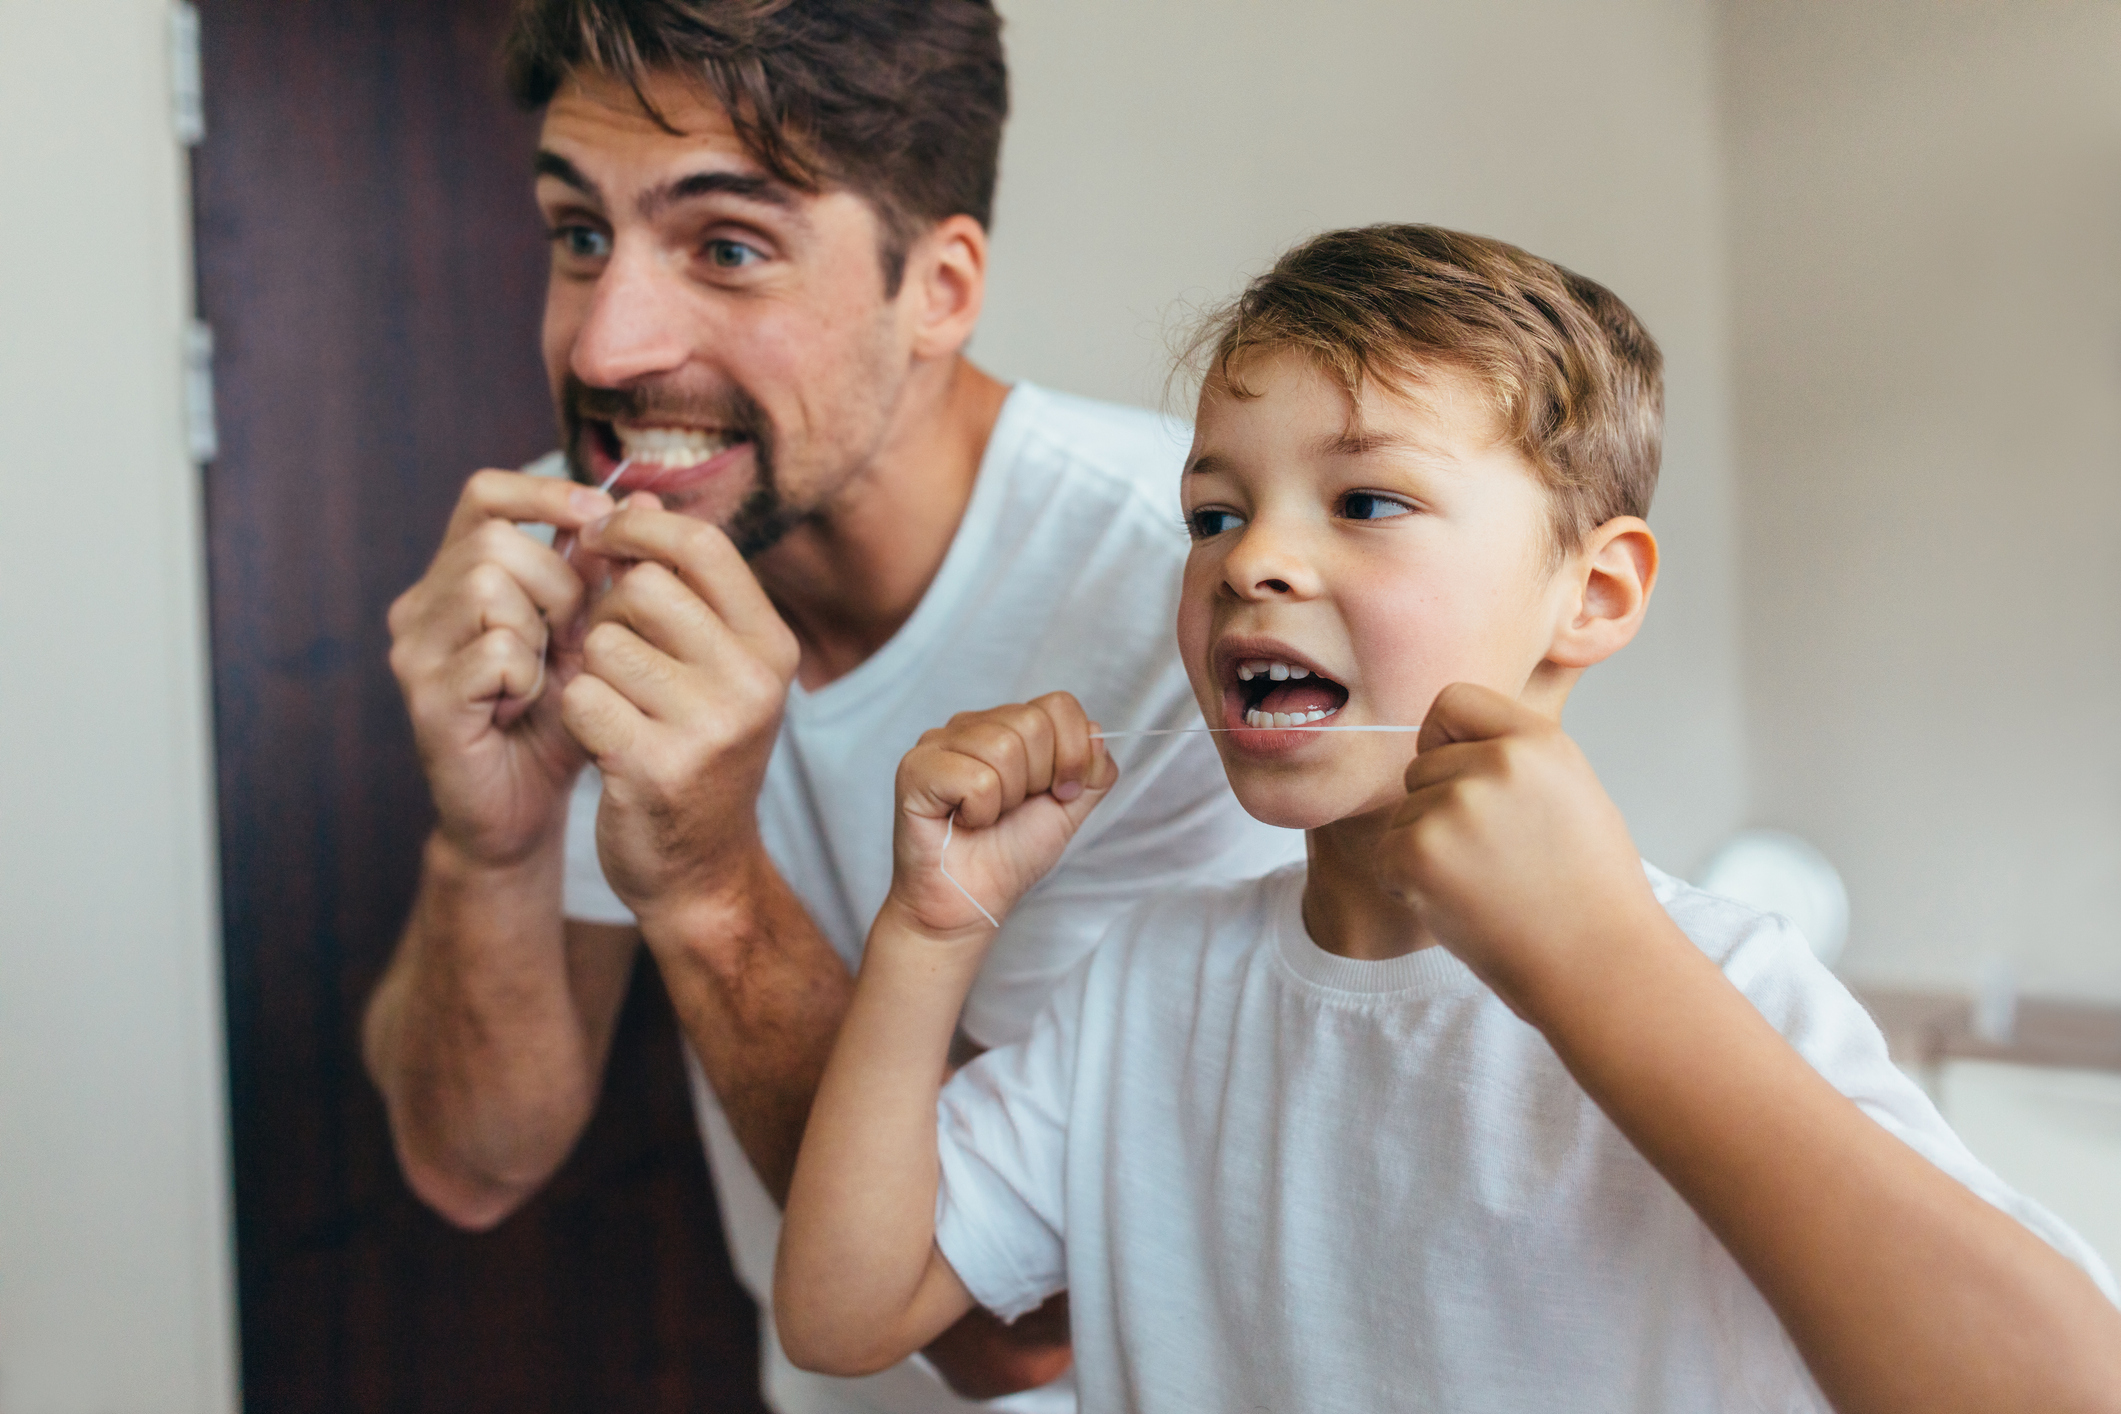 A father flosses his teeth with his son to show the boy the importance of flossing.